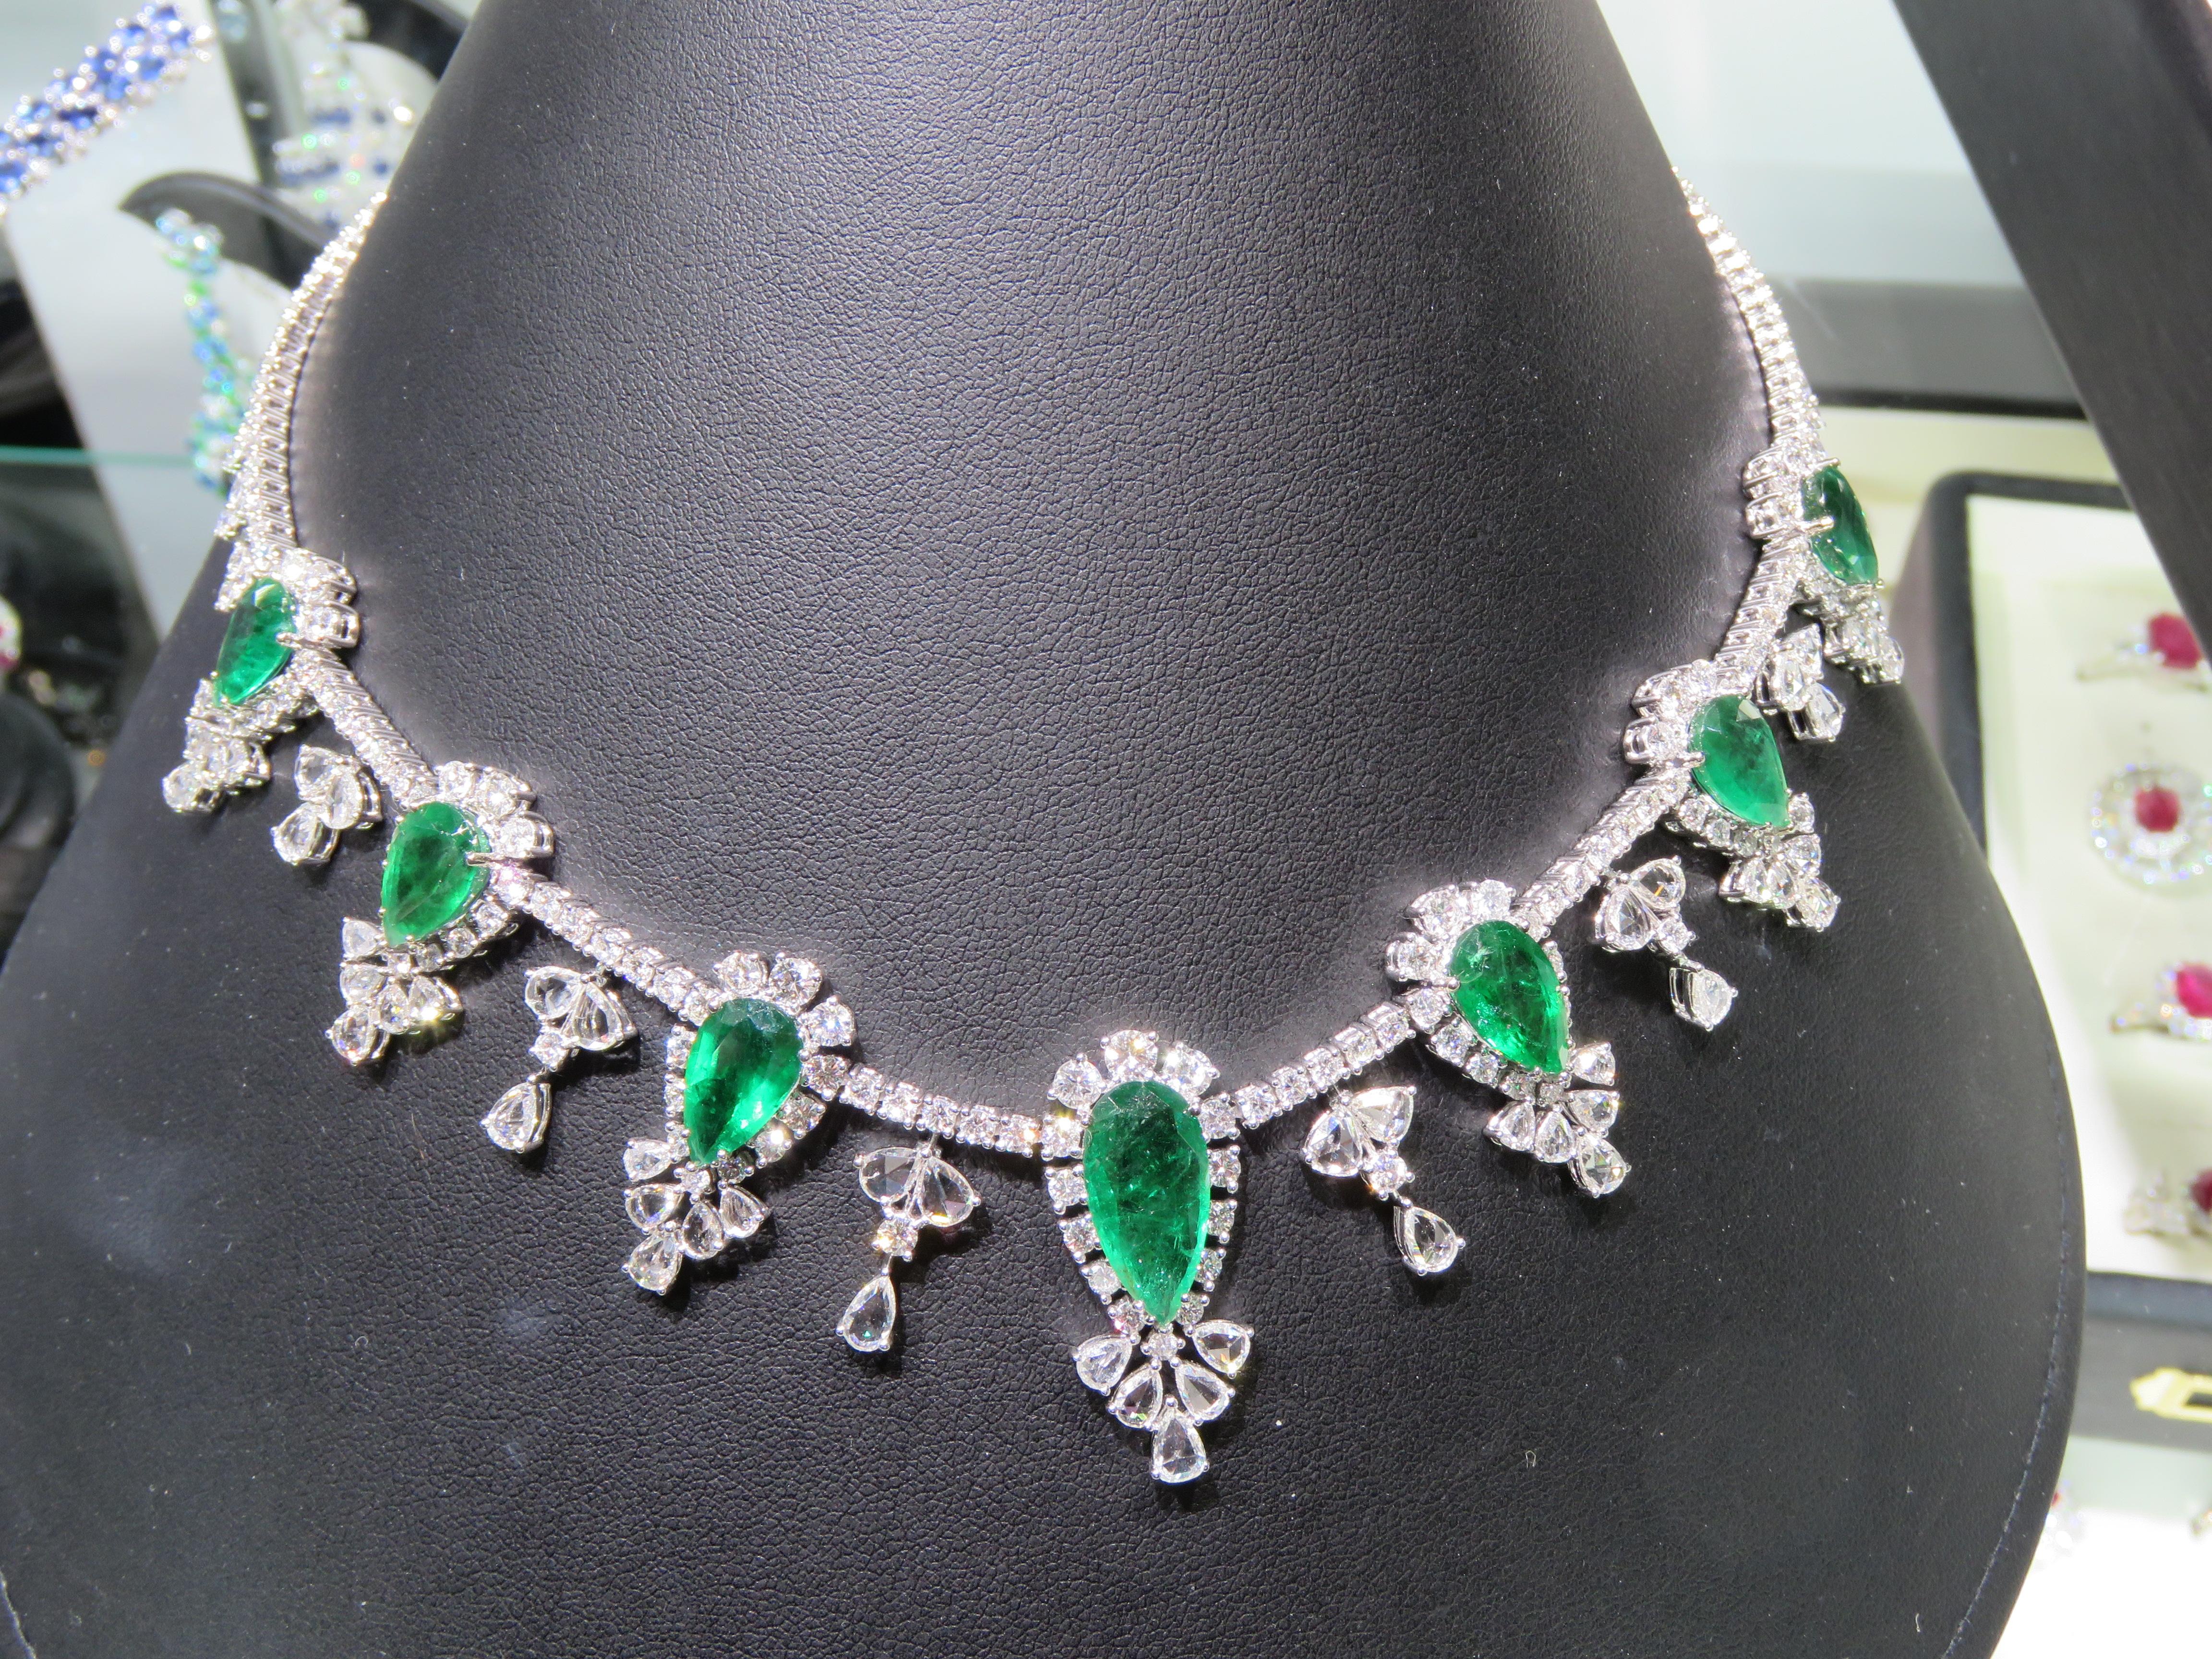 A Rare 18KT White Gold Emerald Diamond Necklace. Necklace is comprised of Finely Set Glittering Gorgeous Pear Shaped Emeralds and adorned with Sparkling Rose Cut and White Diamonds!! T.C.W. approx 43CTS!!! This Gorgeous Necklace is a Sample Piece